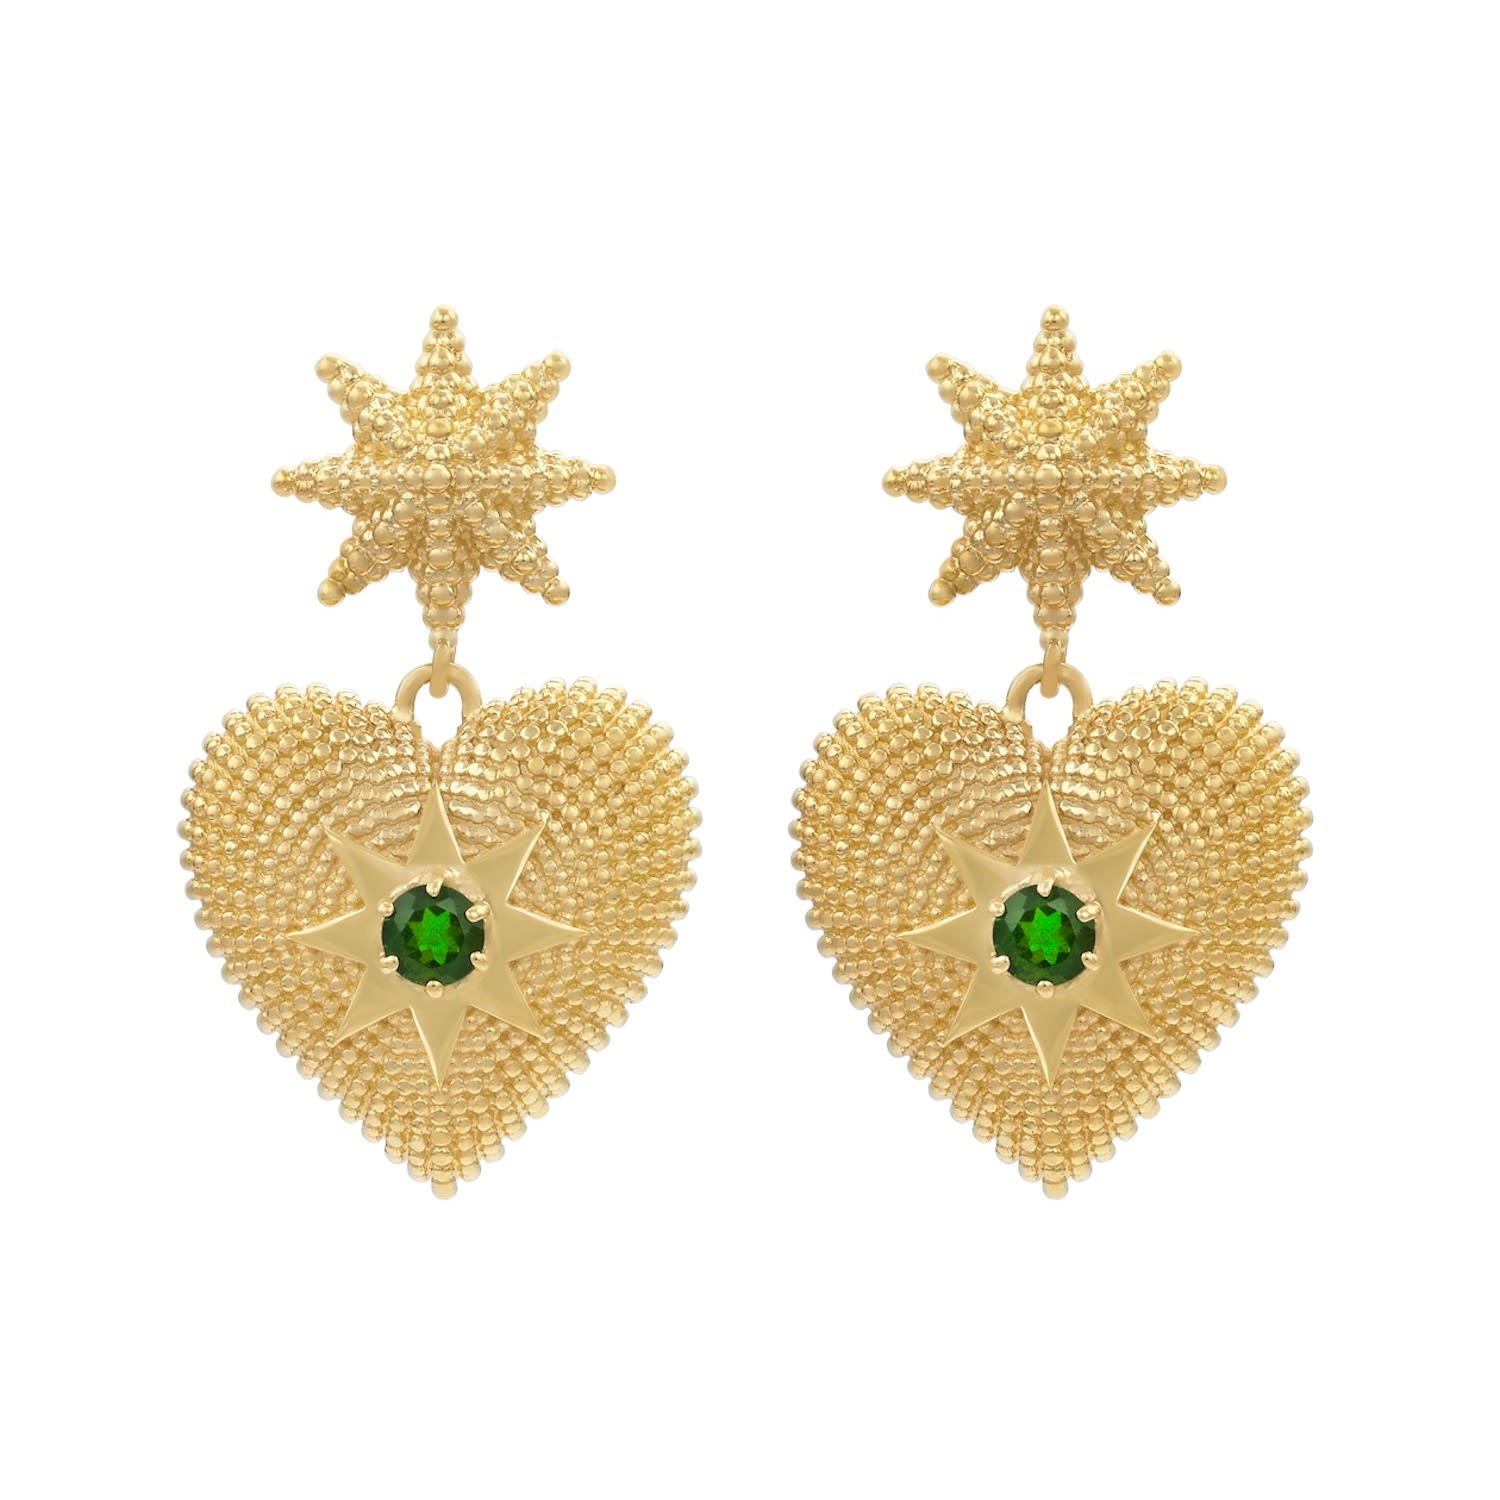 Zoe And Morgan Women's Brave Heart Earrings Gold Chrome Diopside